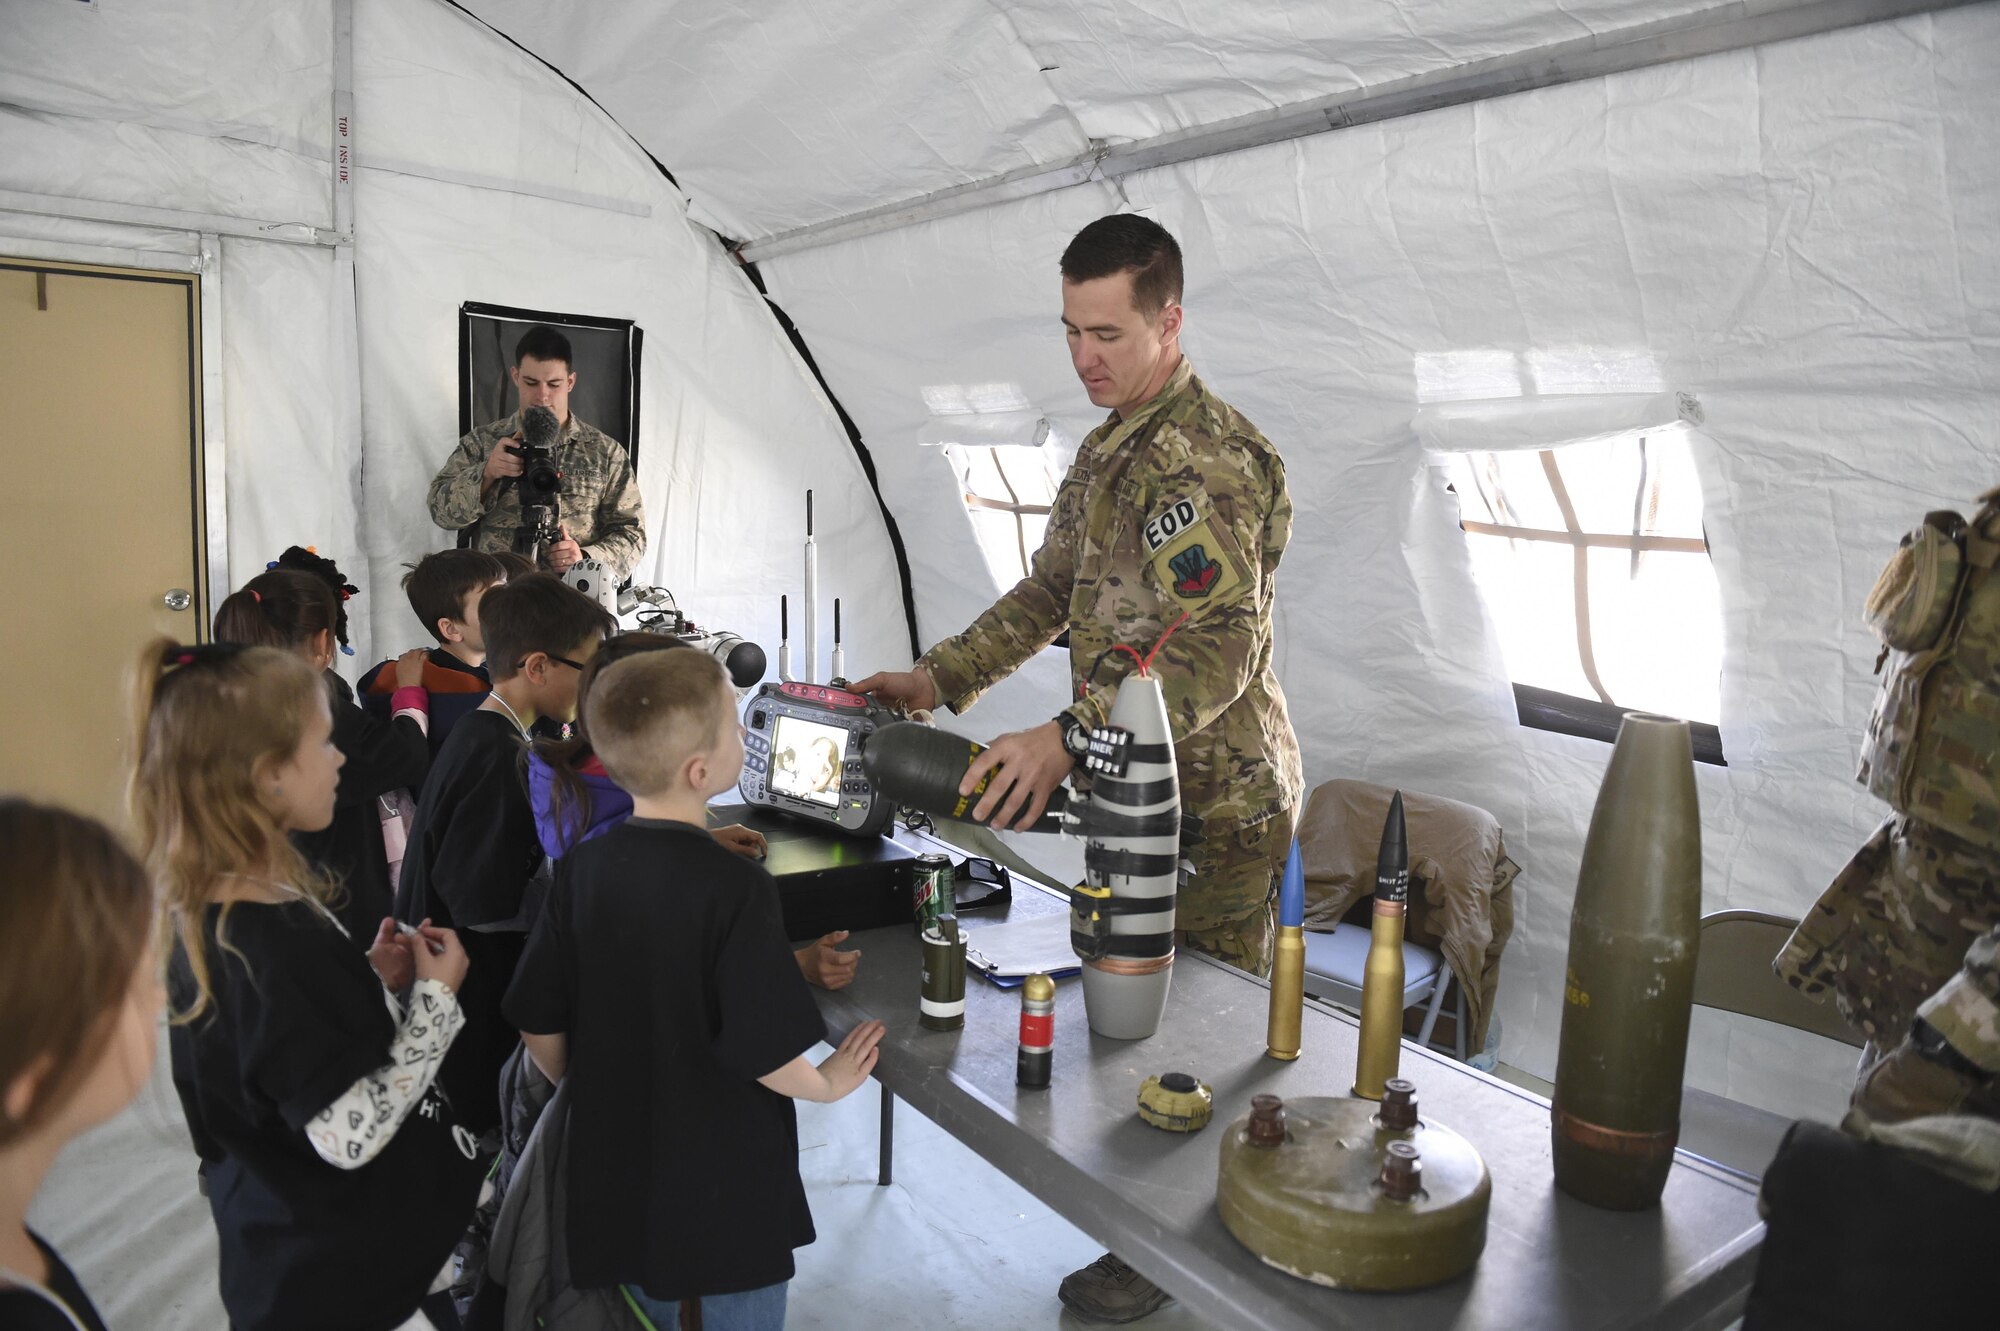 Staff Sgt. Evan Dieckhoff, 49th Civil Engineer Squadron Explosive Ordnance Disposal technician, holds a plastic mock artillery projectile to a student during Operation Kids Investigating Deployment at Holloman Air Force Base, N.M., Feb. 3, 2017. Operation KID is an annual event allowing children of military members to acquire a better understanding of what their parents go through prior to a deployment. Military children were given a walk around the Basic Expeditionary Airfield Resources compound to see a mock deployment site, have a mission brief, paint their faces, try on Mission Oriented Protective Posture gear, and learn about different equipment including the opportunity to see a robot demonstration from Holloman’s EOD unit. (U.S. Air Force photo by Staff Sgt. Stacy Jonsgaard)